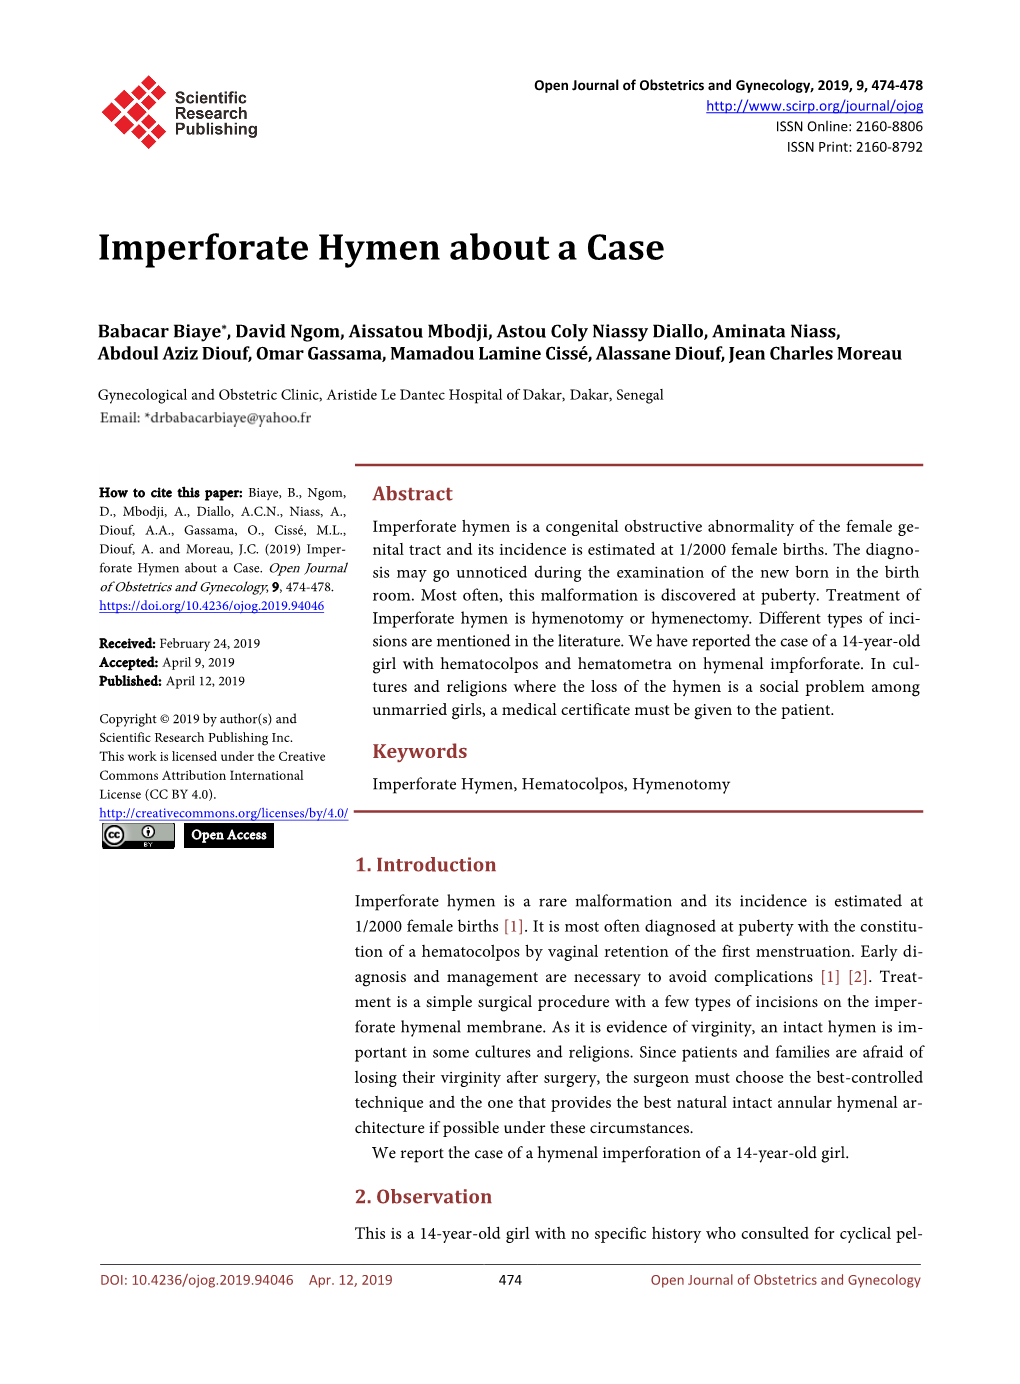 Imperforate Hymen About a Case